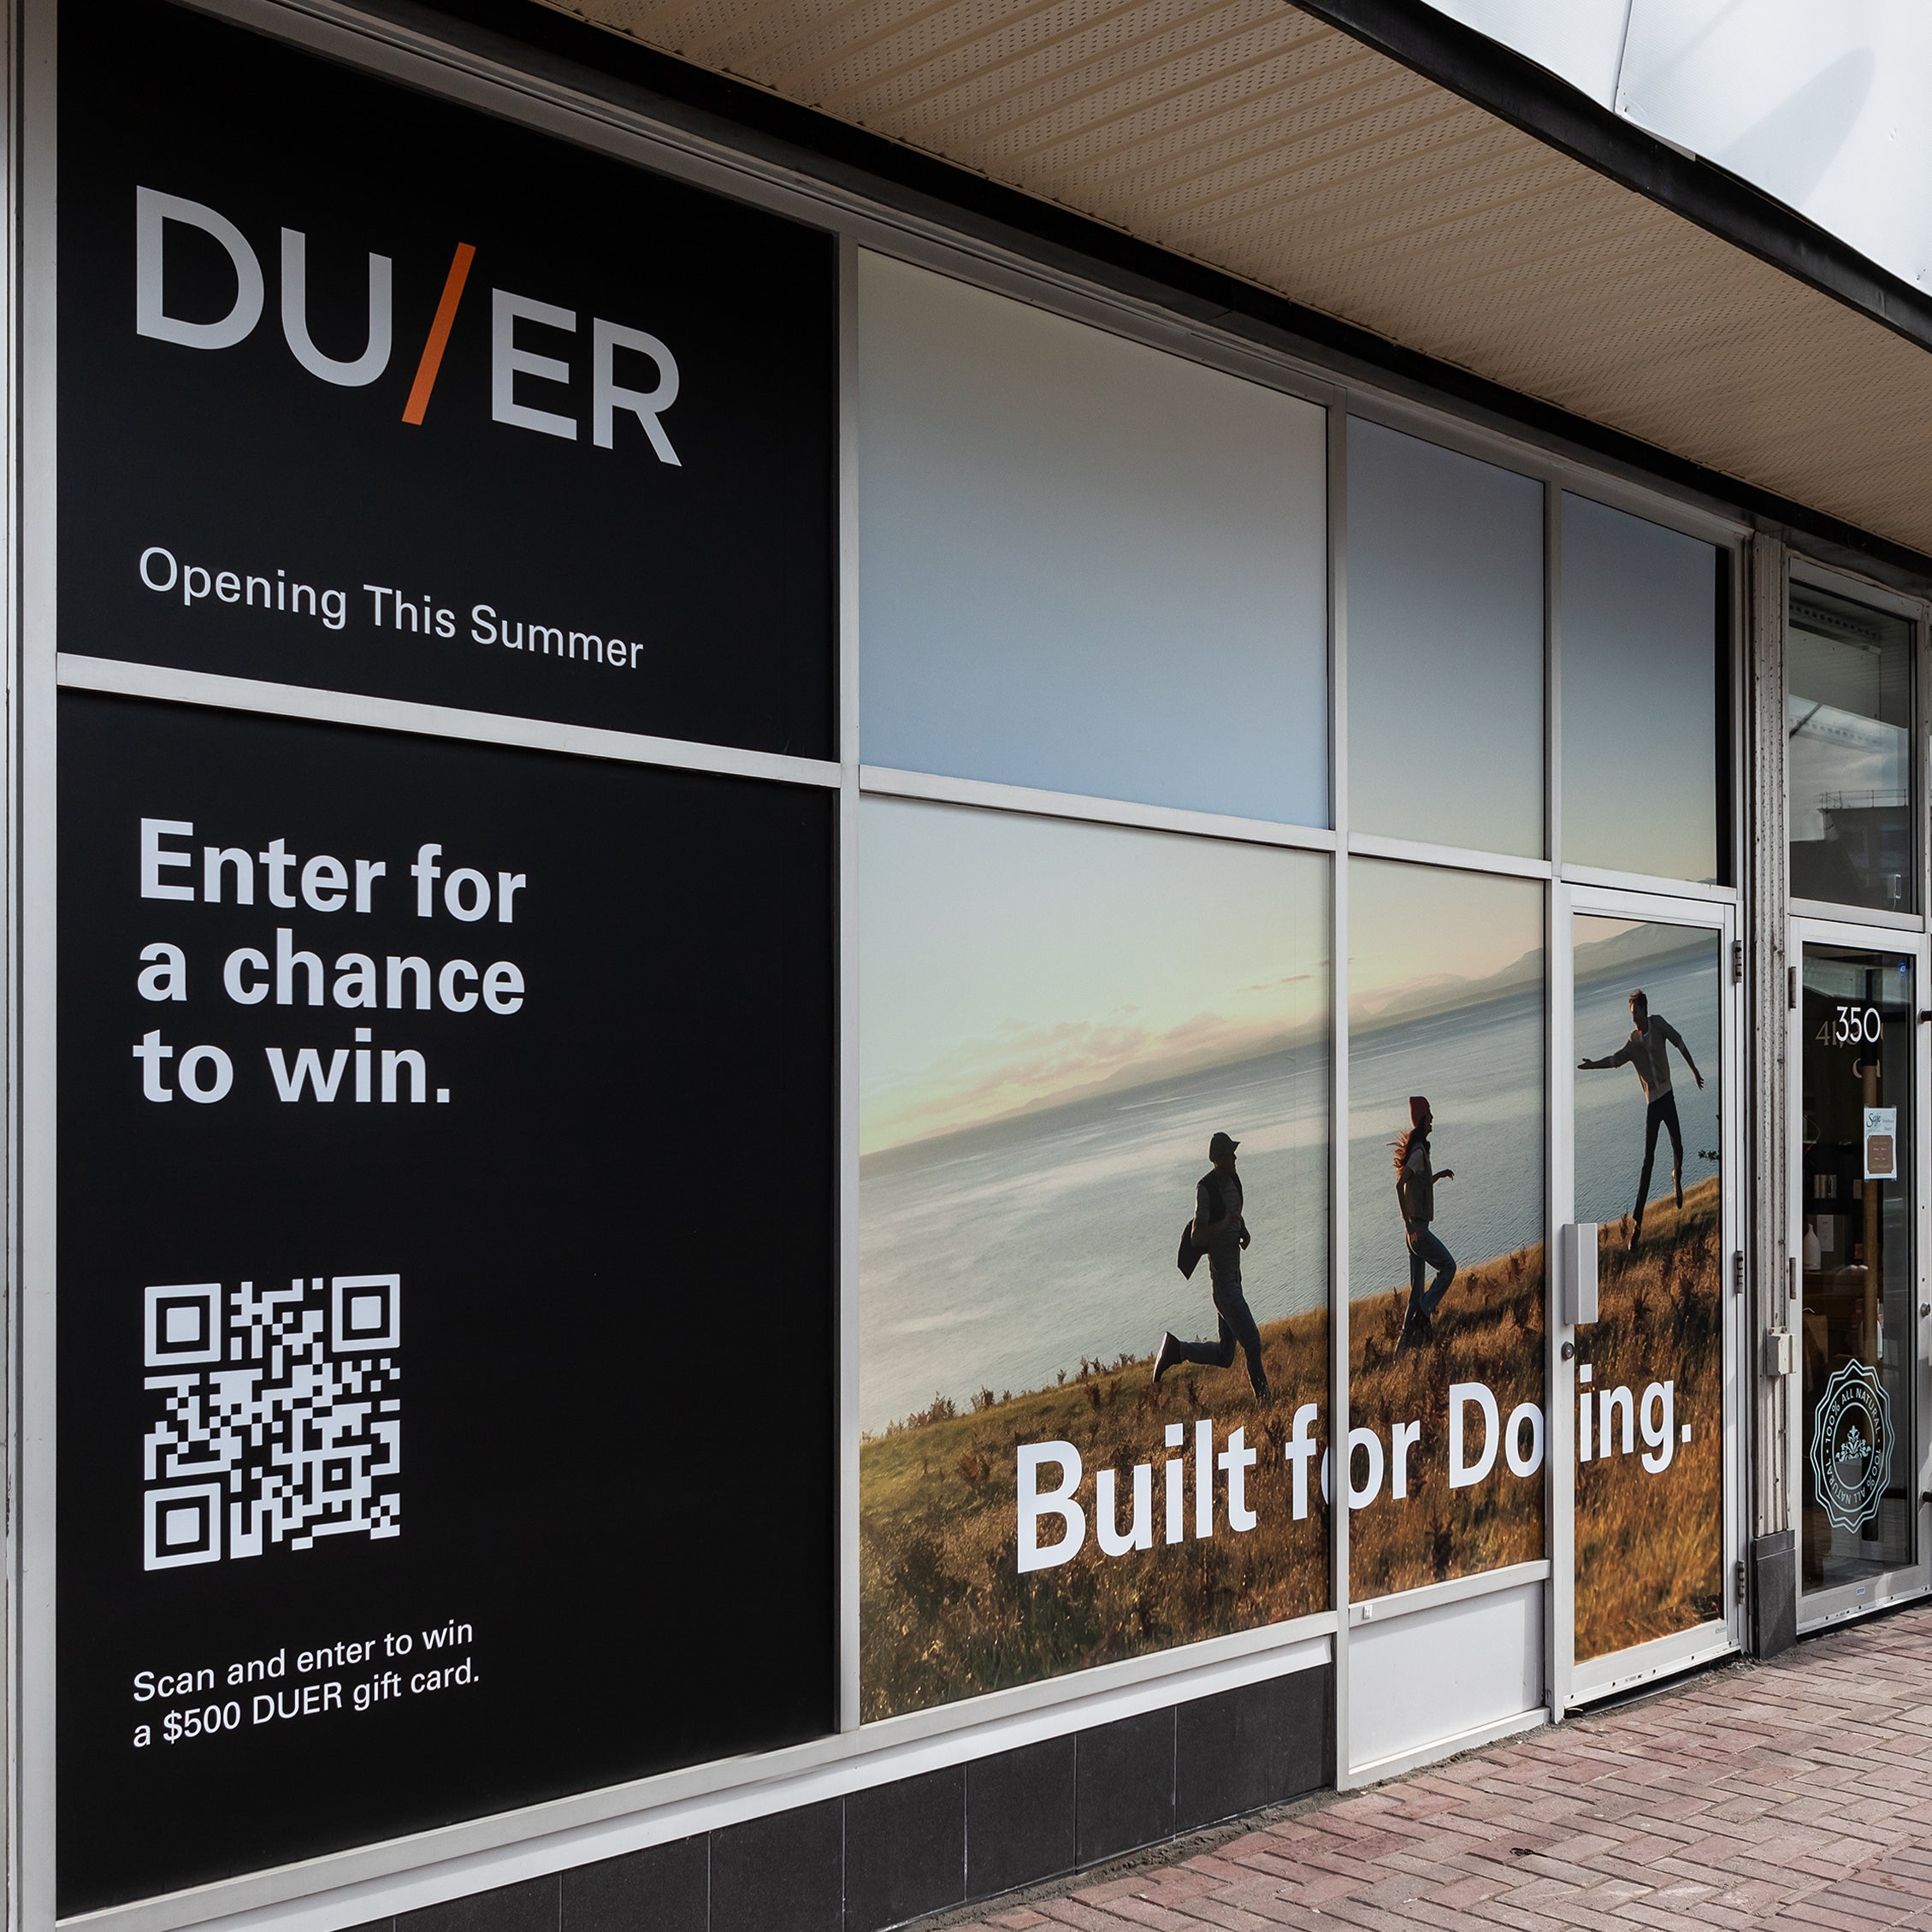 Storefront of DU/ER with promotional banners featuring people jogging by the seaside, a qr code for a contest